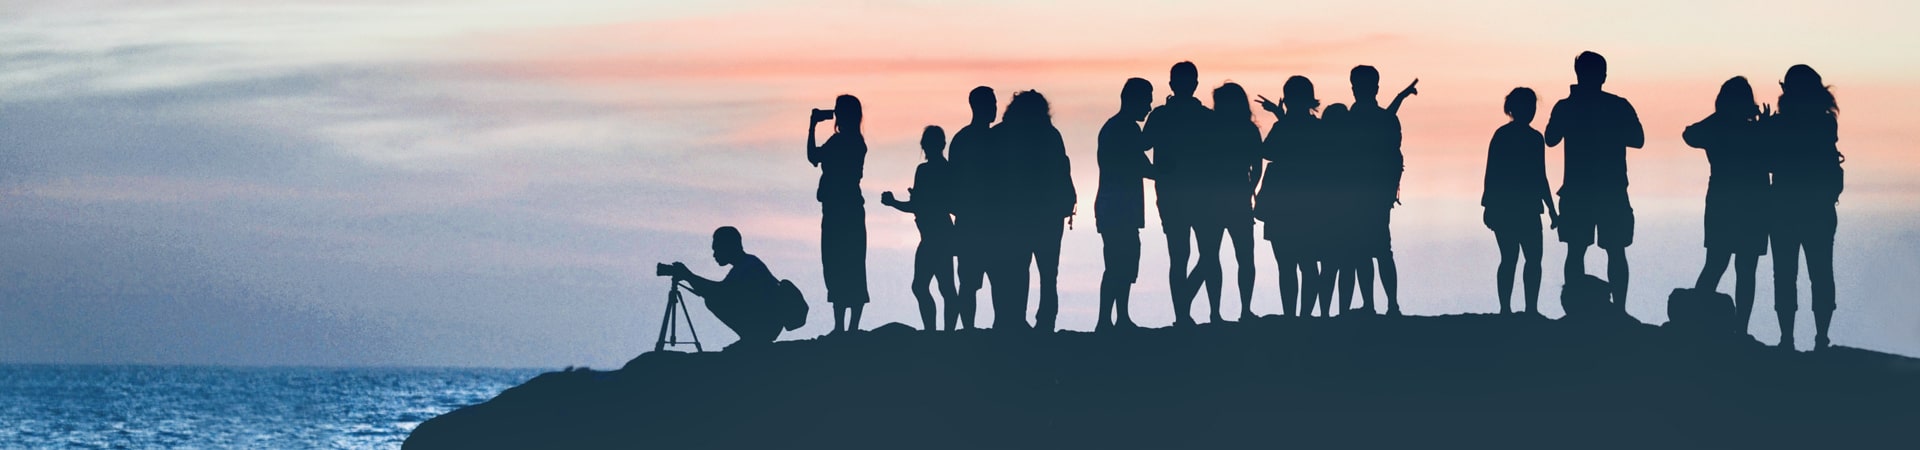 Silhouettes of a group of people at a shore